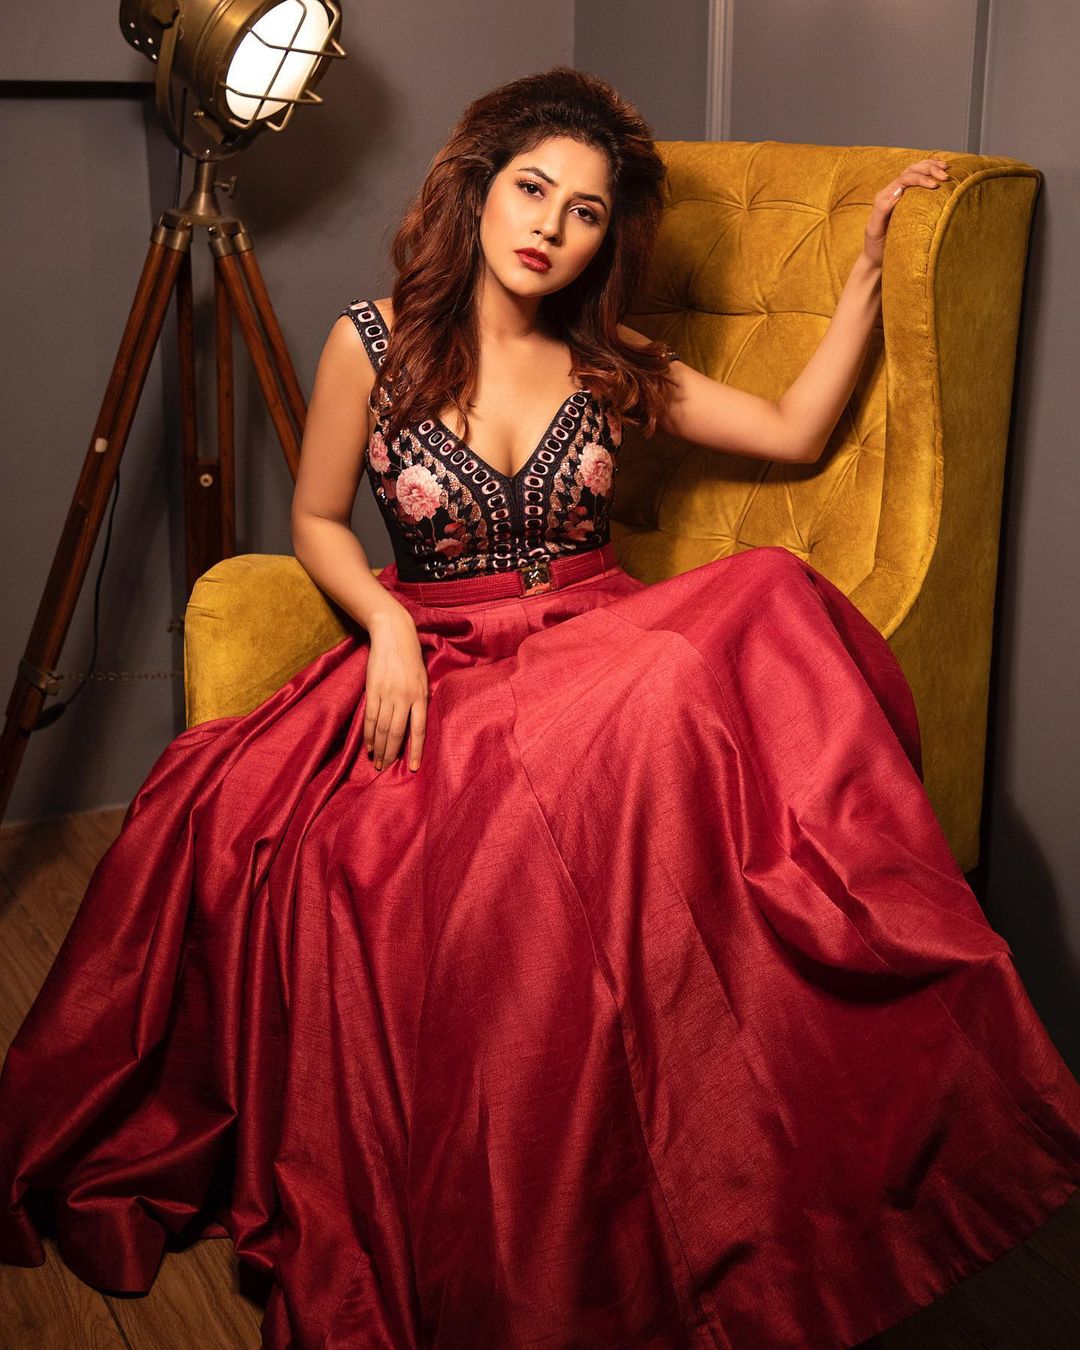 Shehnaaz Gill Looks Like A Red Hot Patakha Donning A Plunging Neckline Gown  With Impossible-To-Miss Puffed Sleeves & A Wild Vision To Behold!